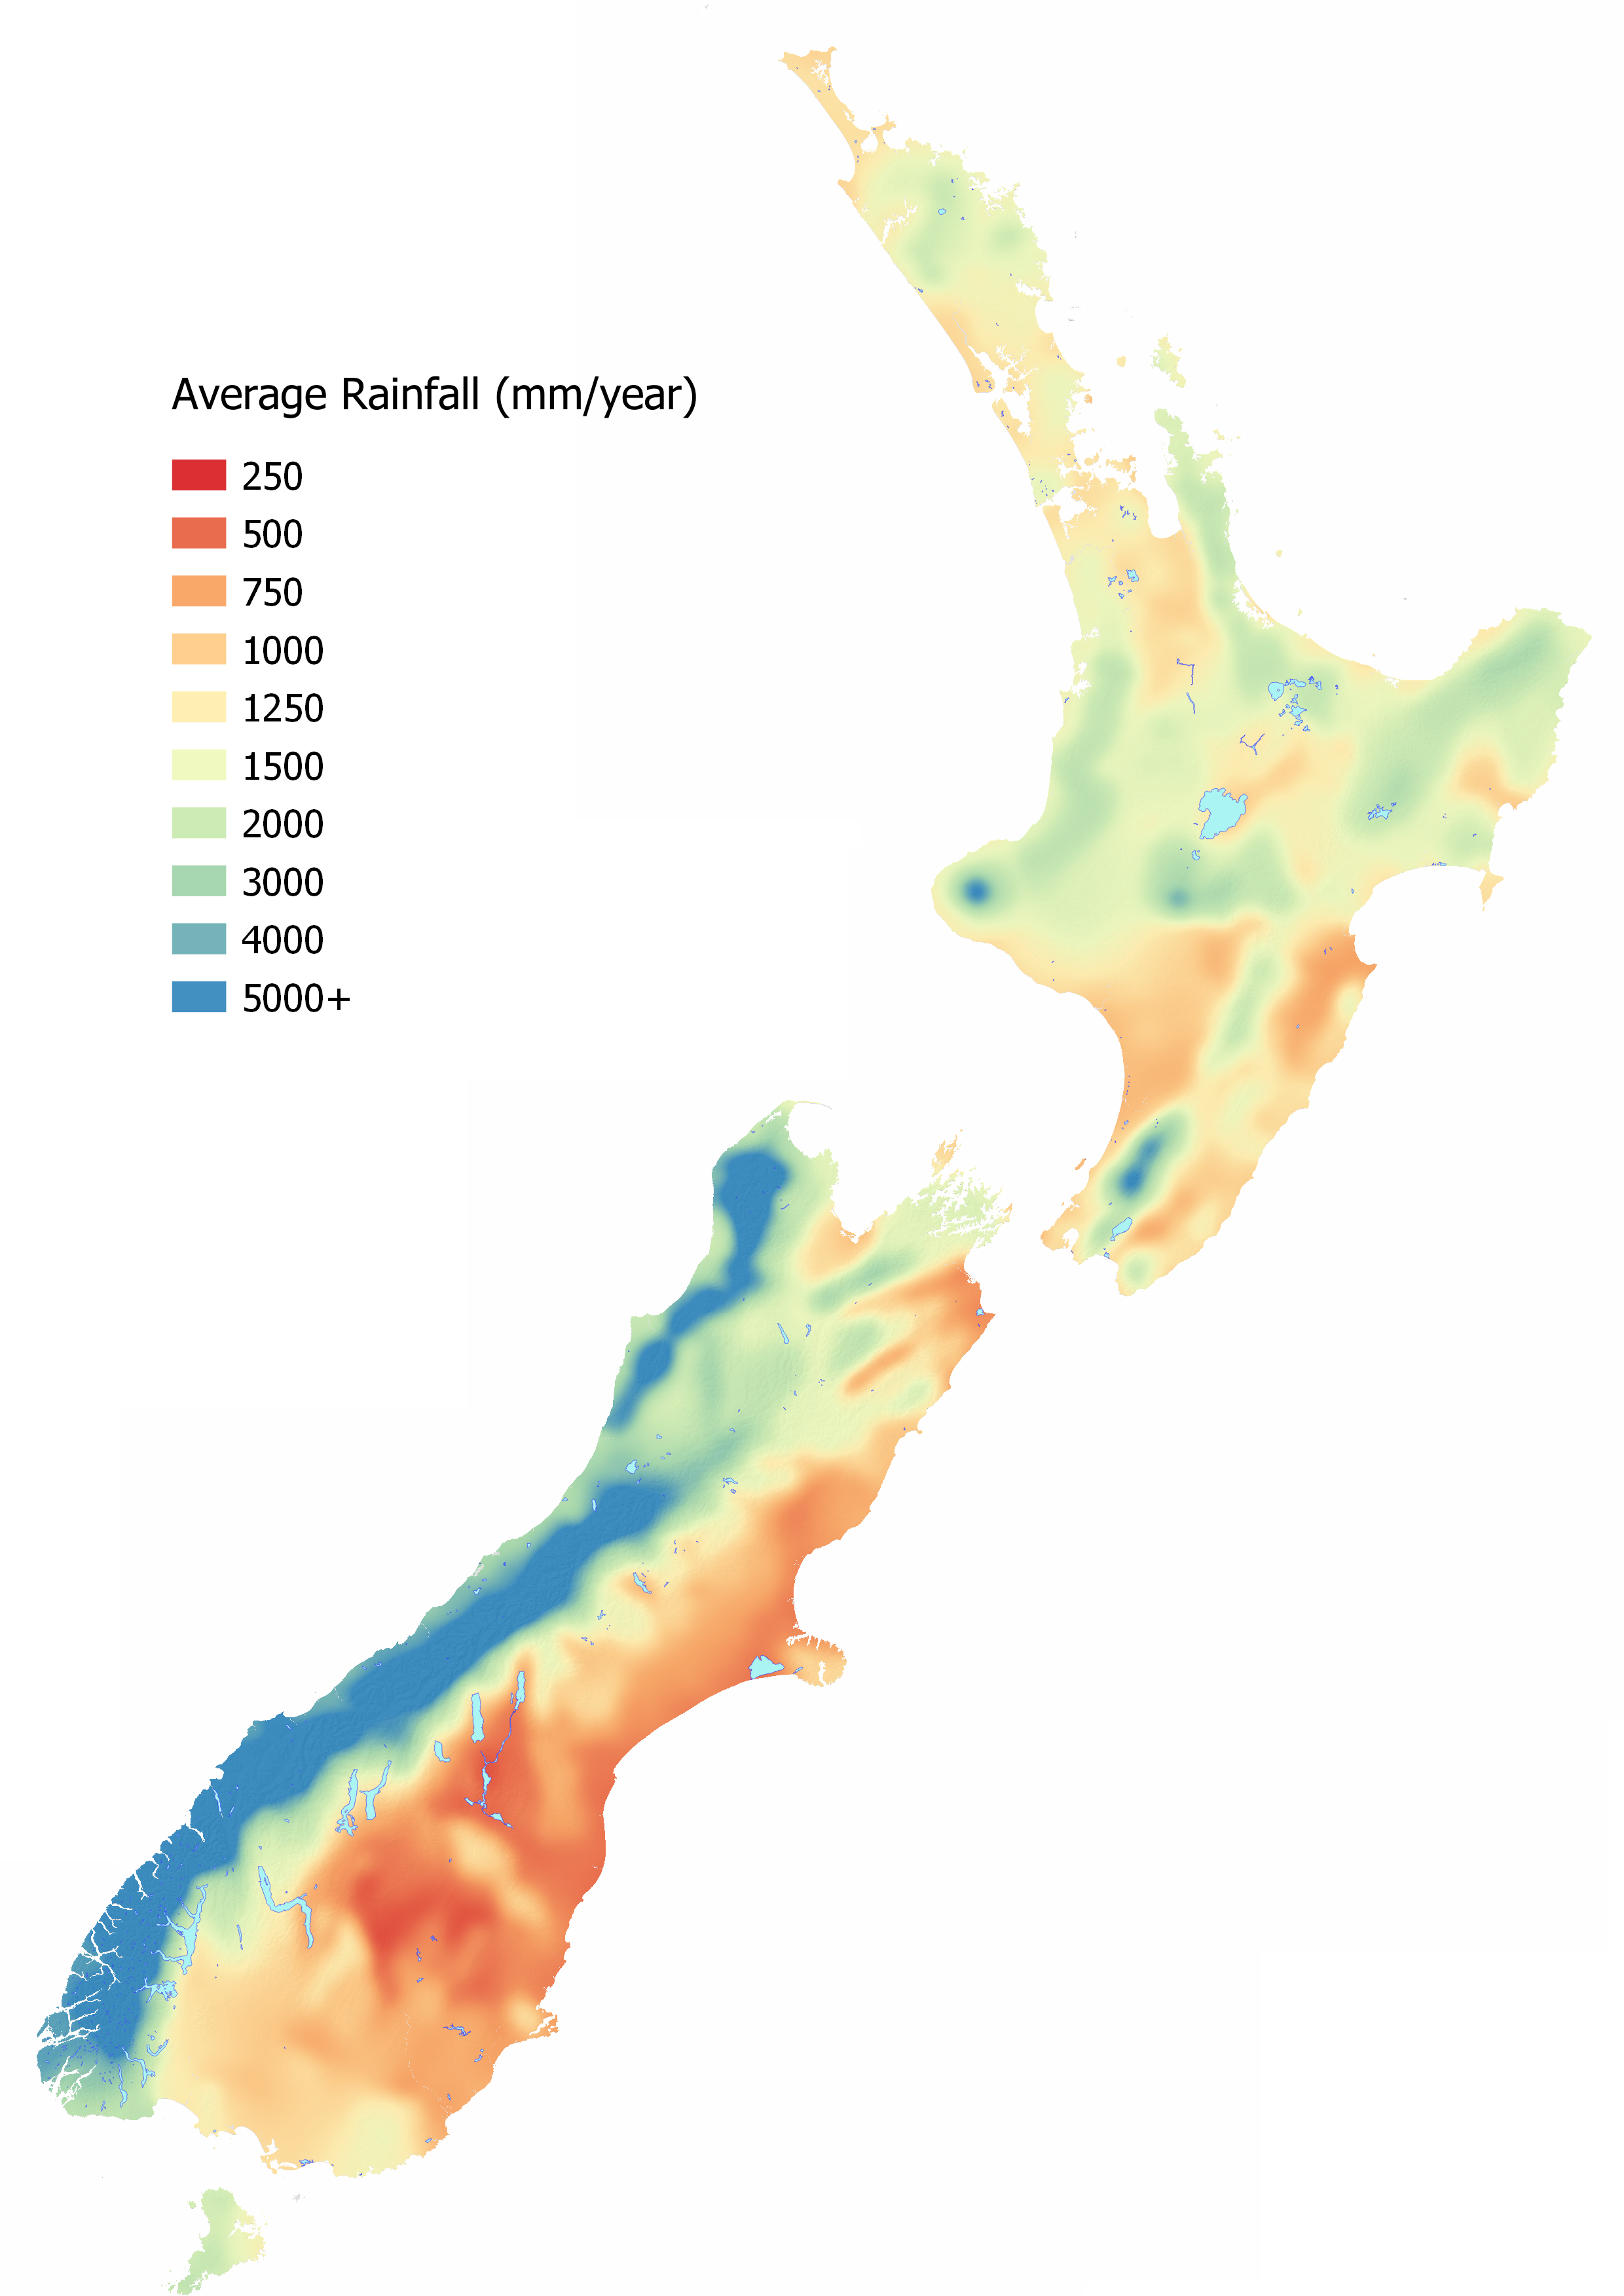 Color coded map of New Zealand showing annual rainfall from 250 millimeters (Otago) to over 5000 millimeters (Fiordland, West Coast).